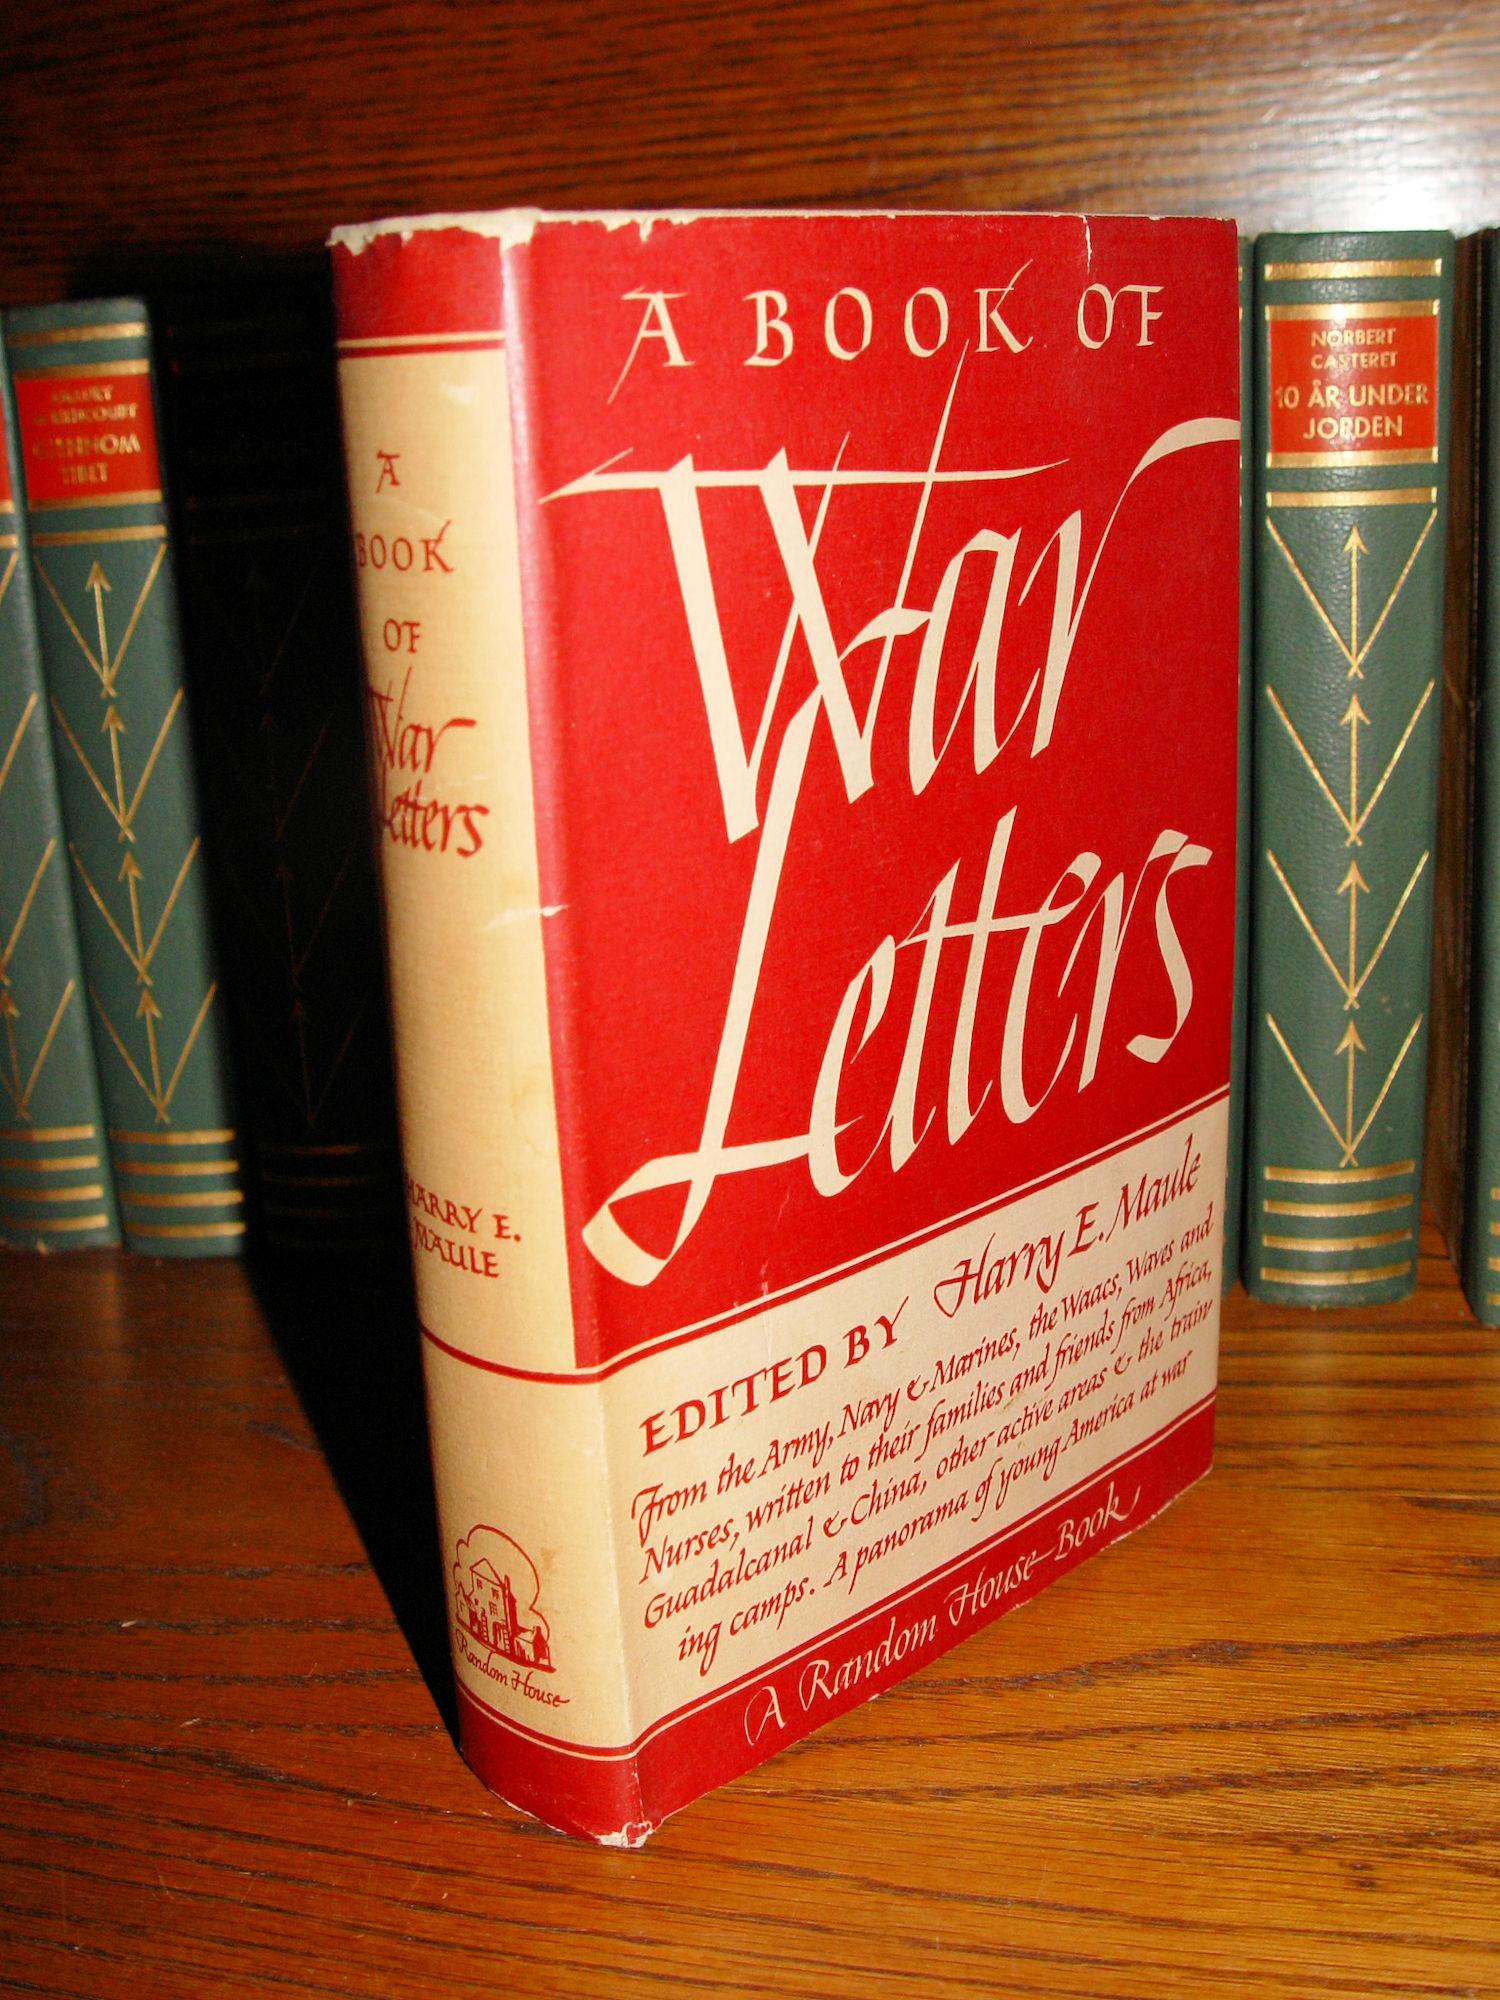 1943 A Book of
                          War Letters edited by Harry E. Maule